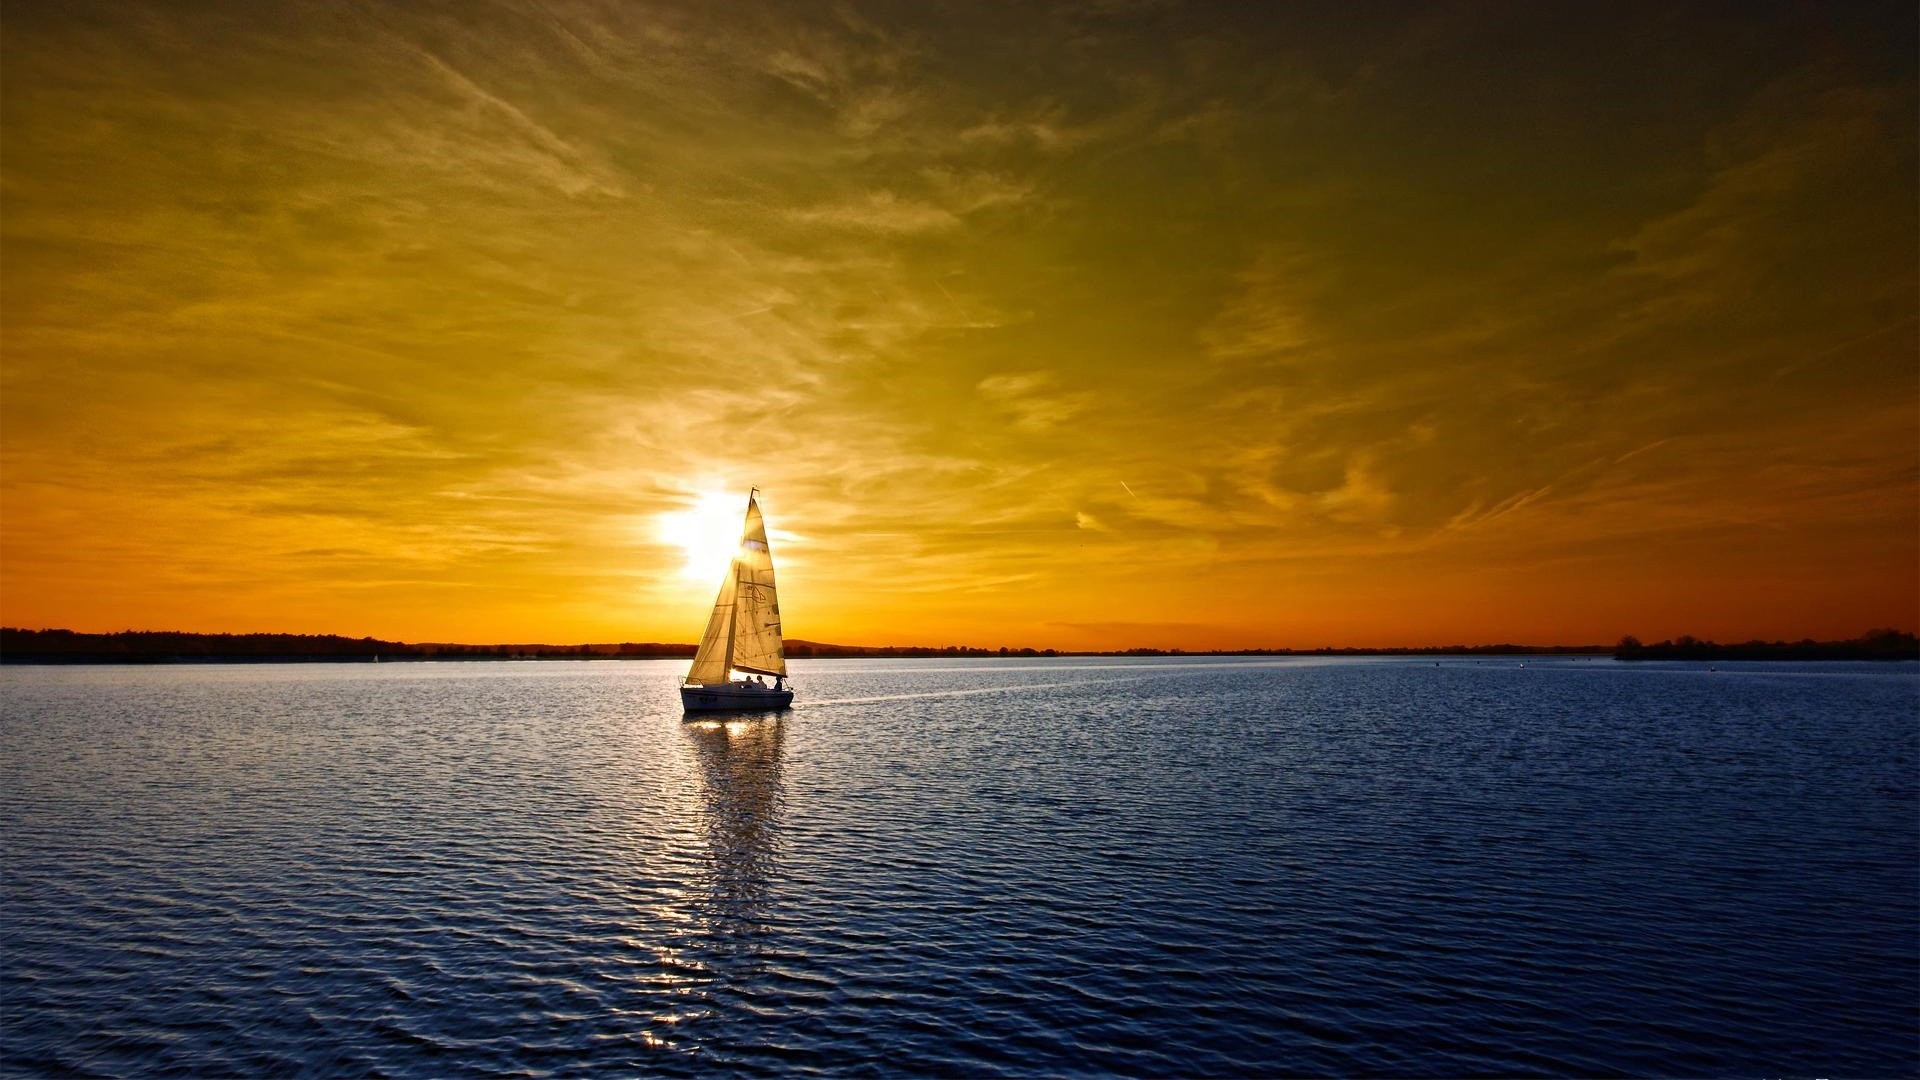 General 1920x1080 sunset boat landscape nature water sky sunlight clouds vehicle sailboats